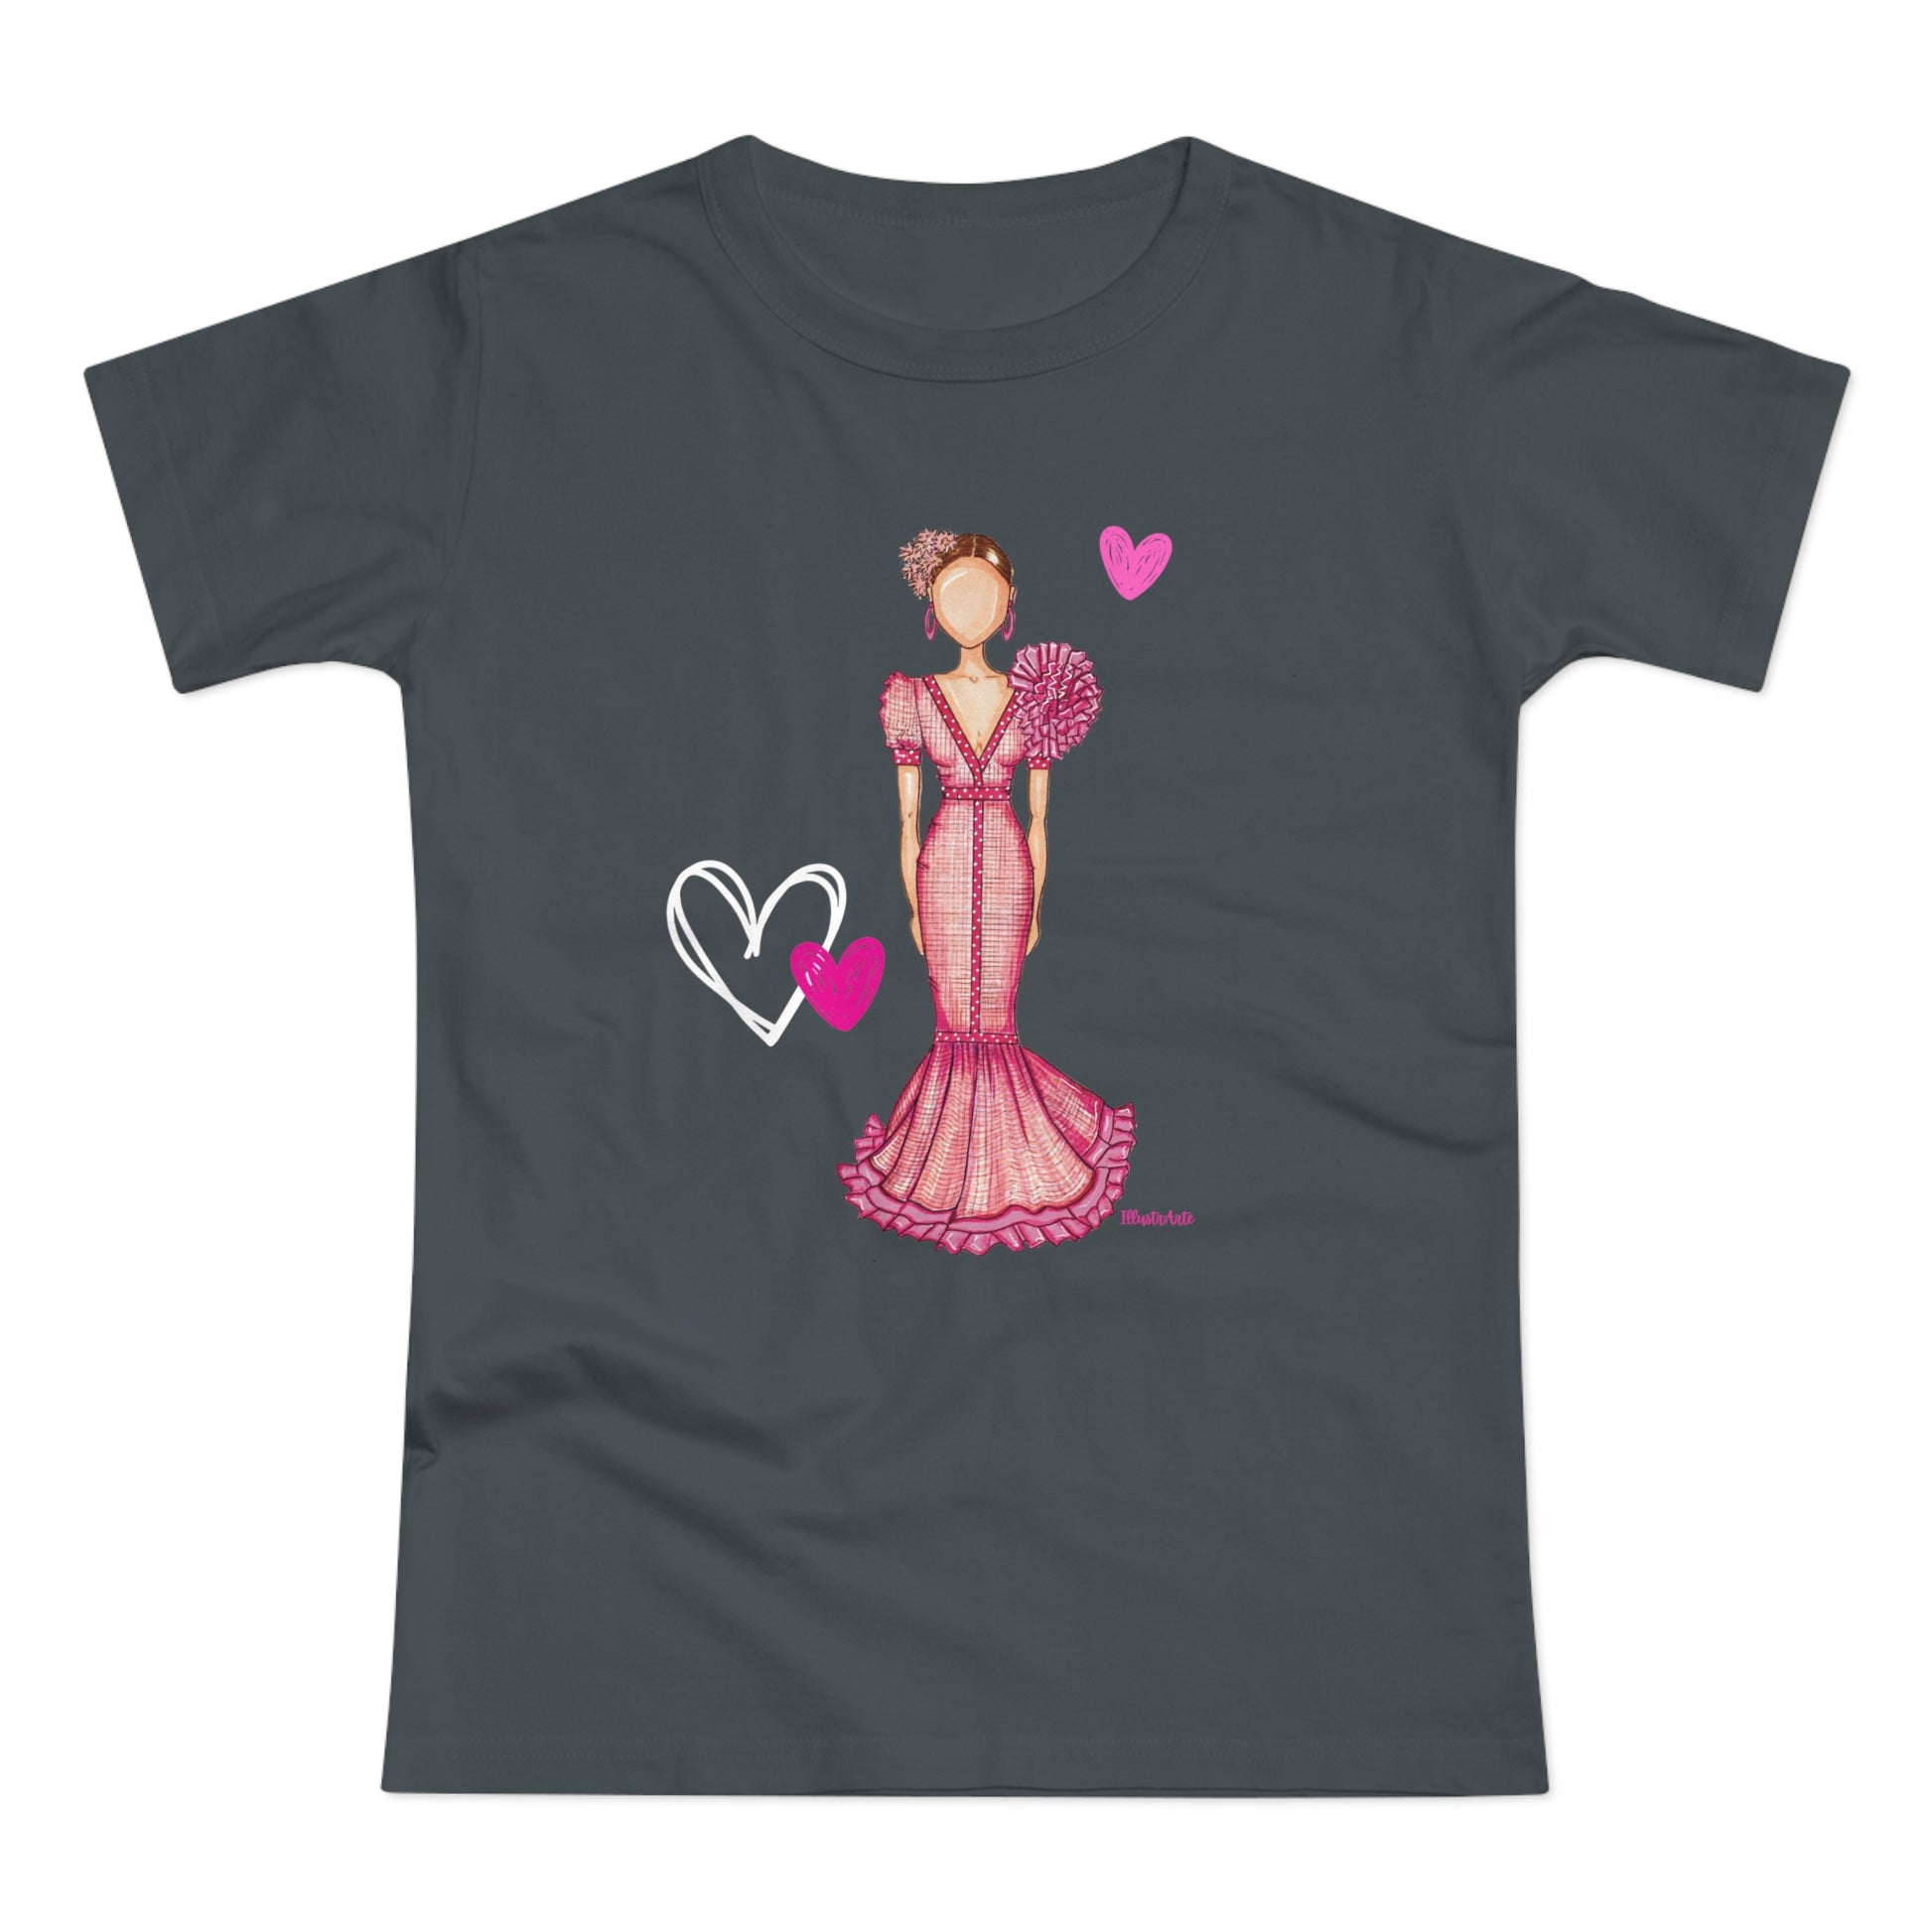 a women's t - shirt with a woman in a pink dress holding a